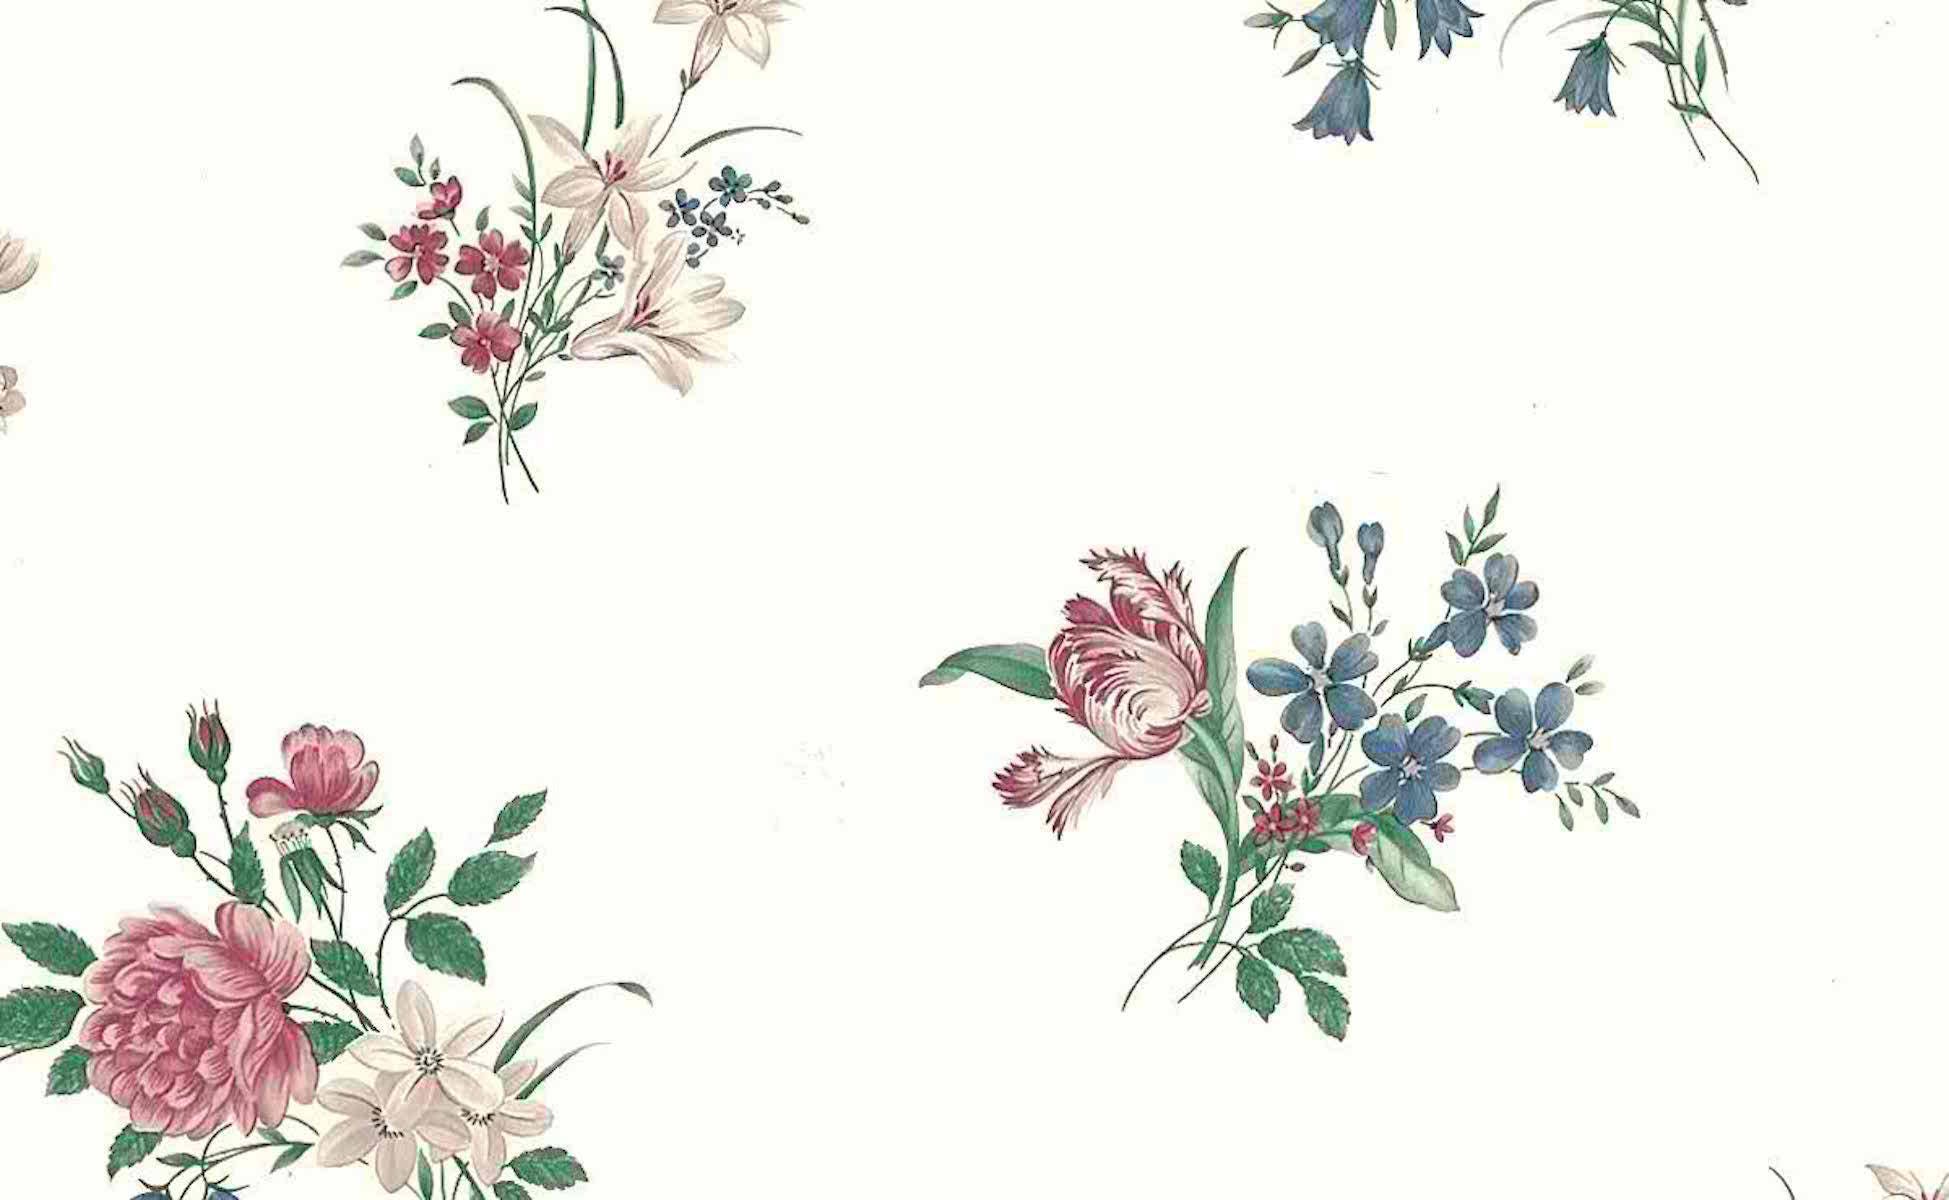 Vintage Wallpaper double rolls Victorian wall decorMurelle Wall Coverings Pre-Pasted Vinyl Rolls of Wallpaper Floral Bouquet Wallpaper